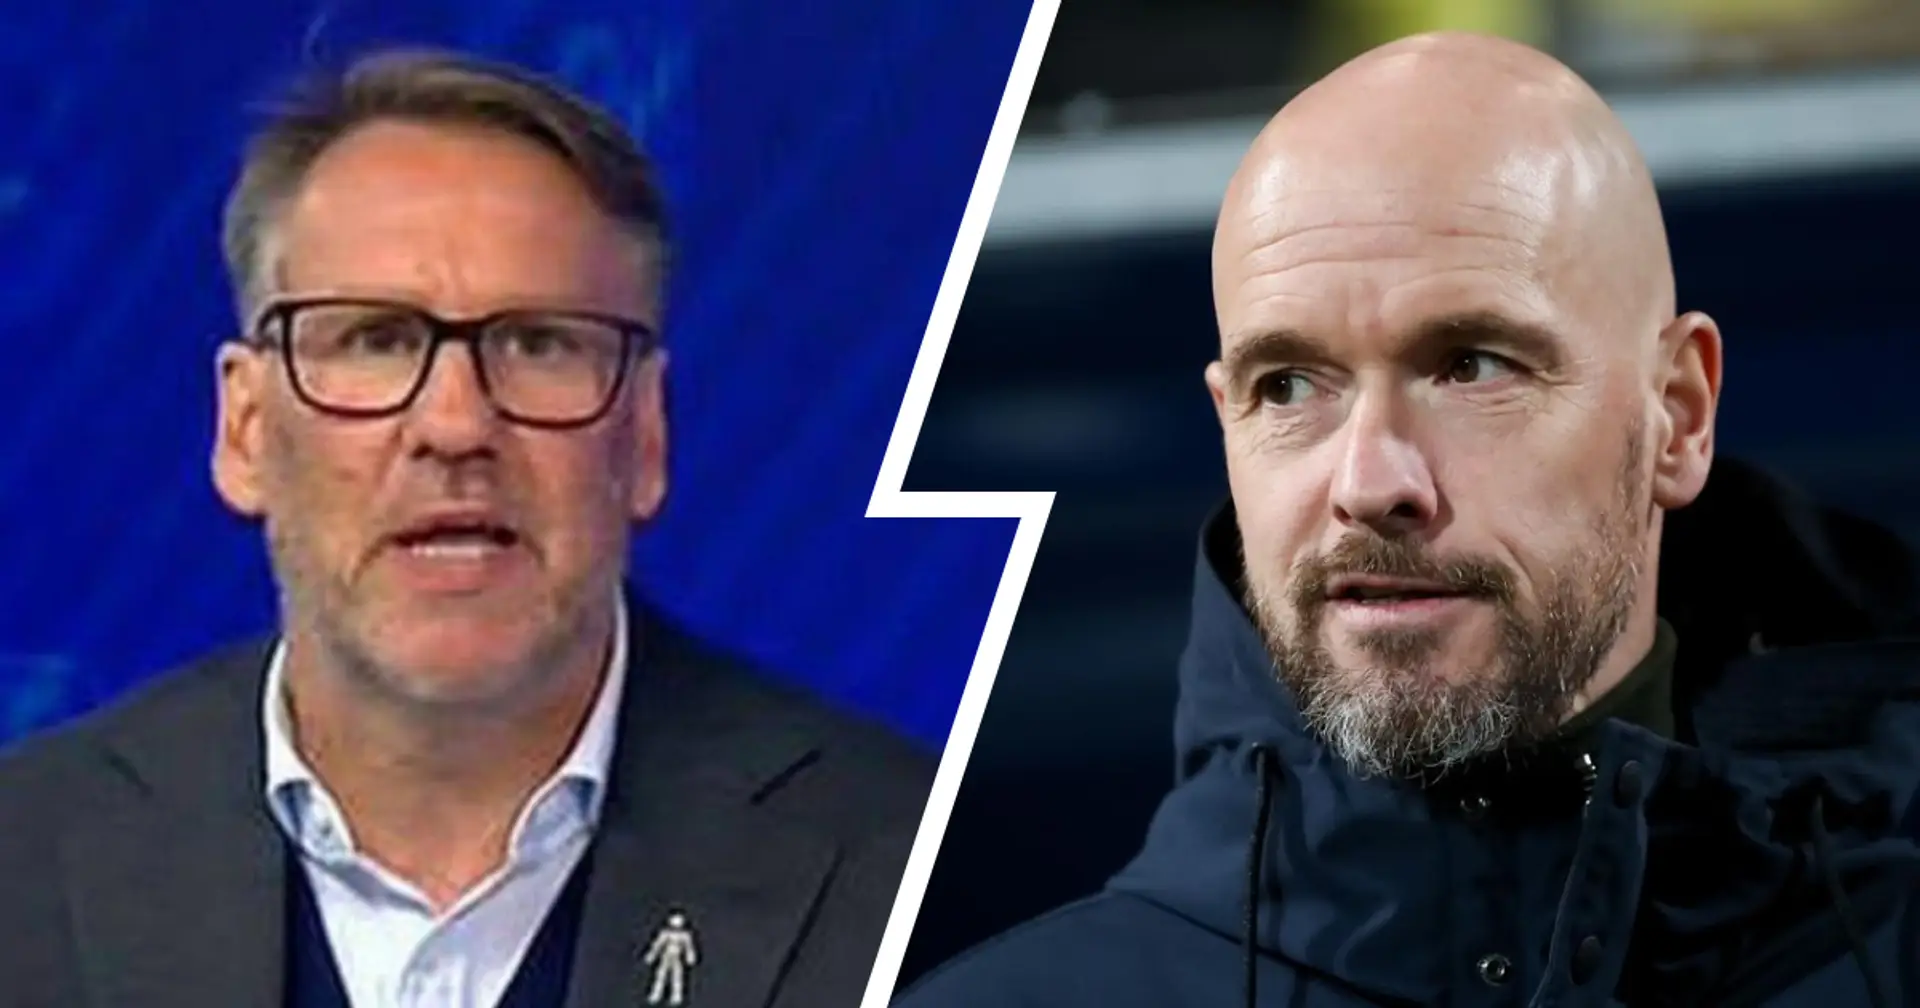 'I'm not sure how good a manager he is': Paul Merson questions Ten Hag's appointment